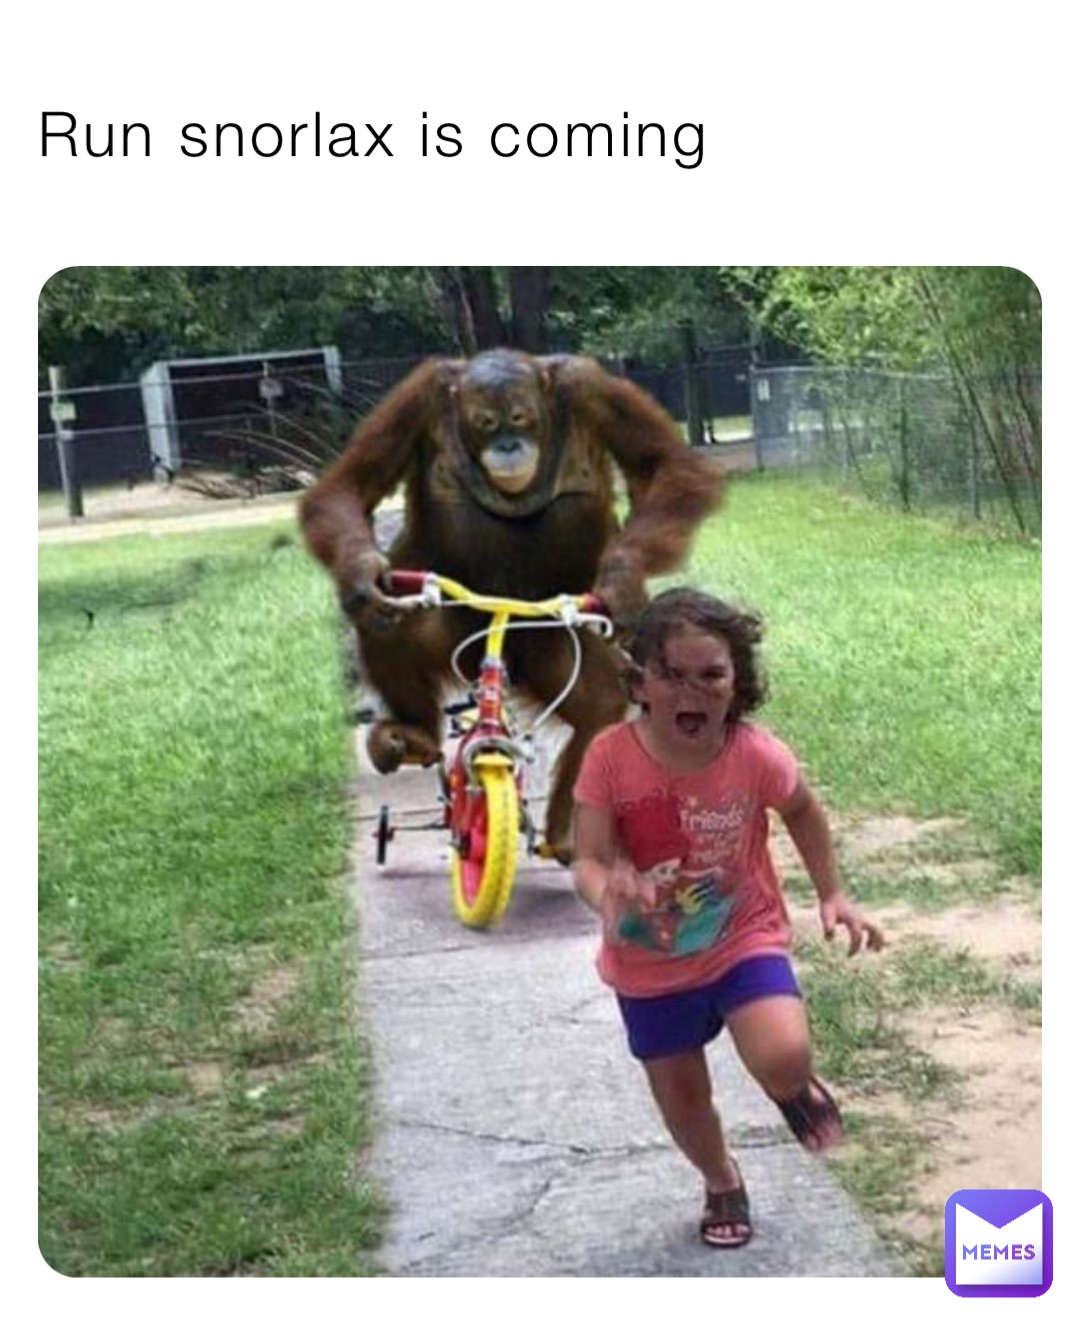 Run snorlax is coming